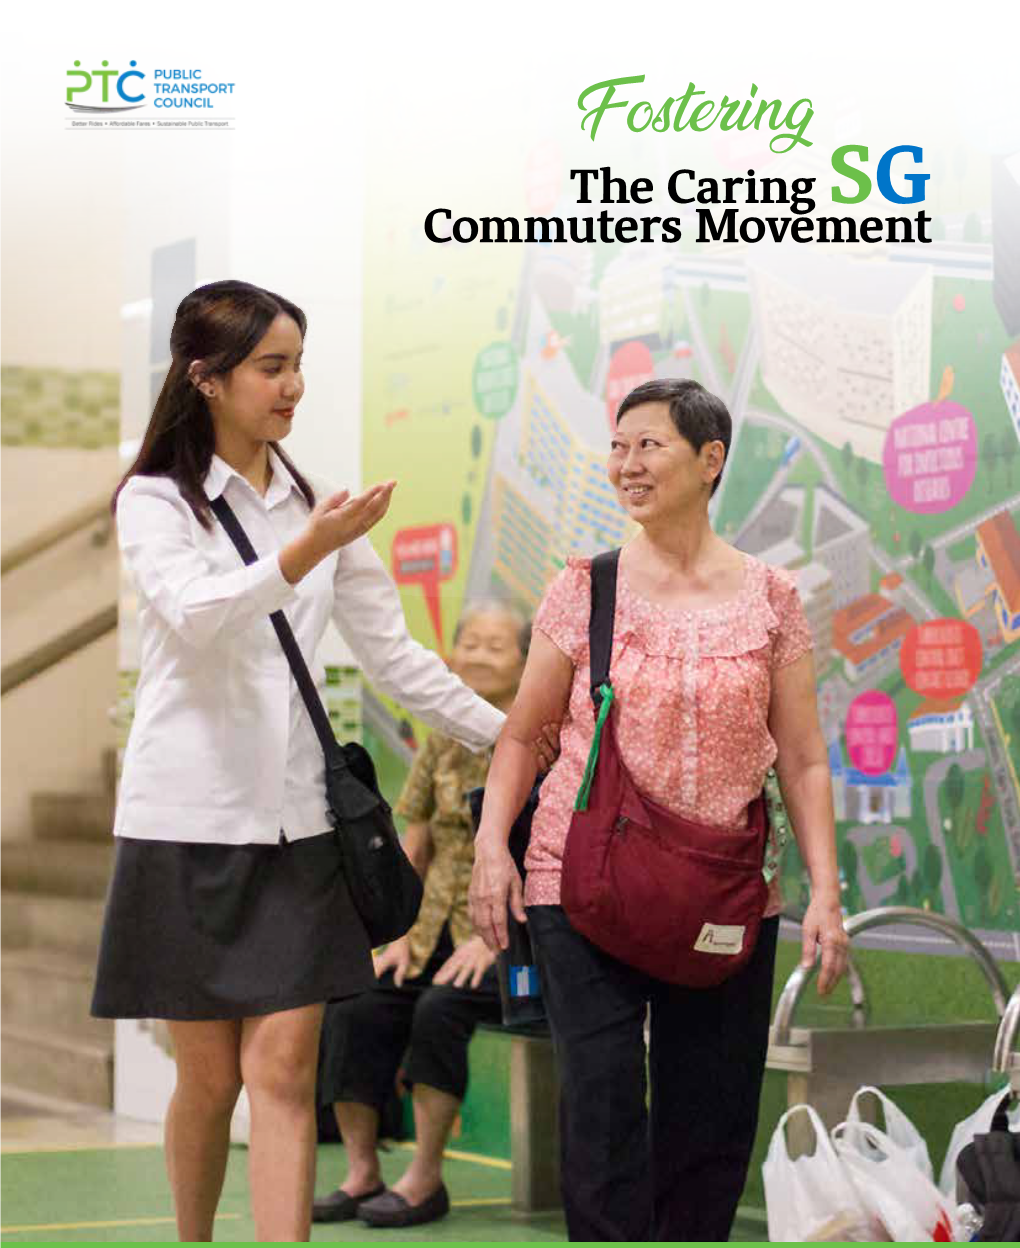 Fostering the Caring SG Commuters Movement Contents